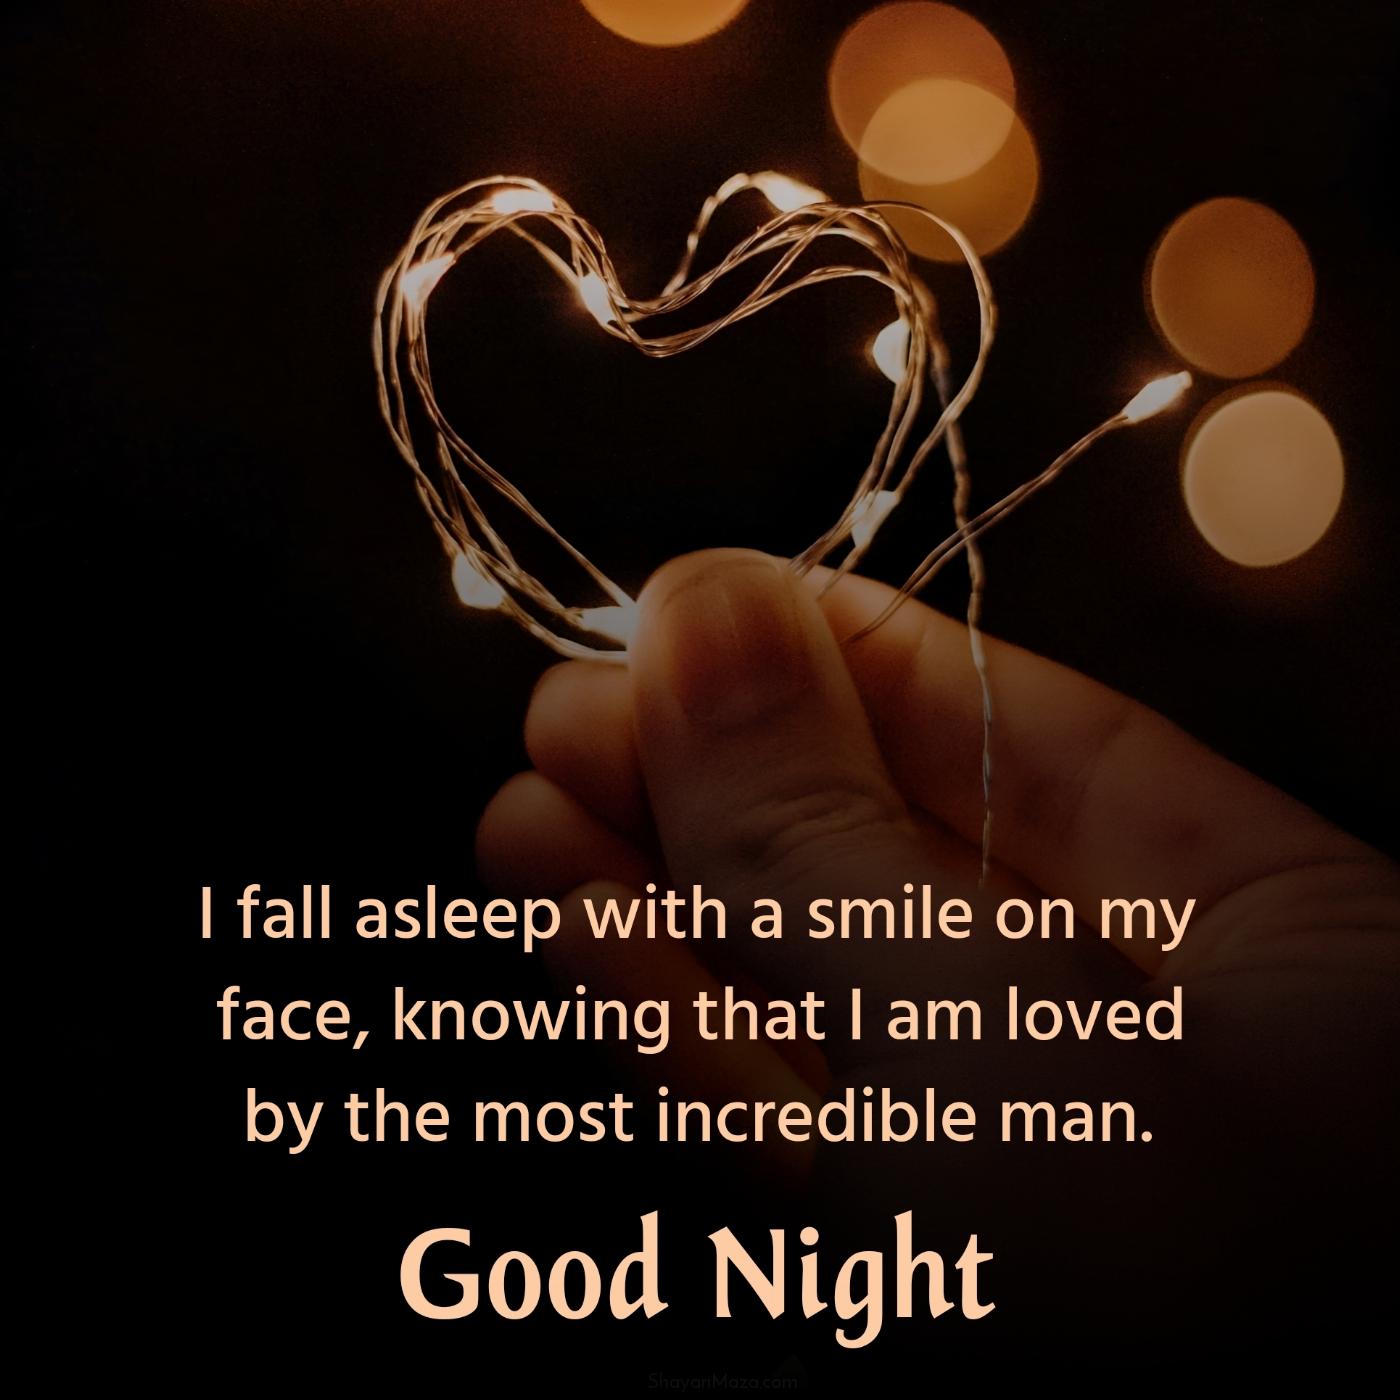 I fall asleep with a smile on my face knowing that I am loved